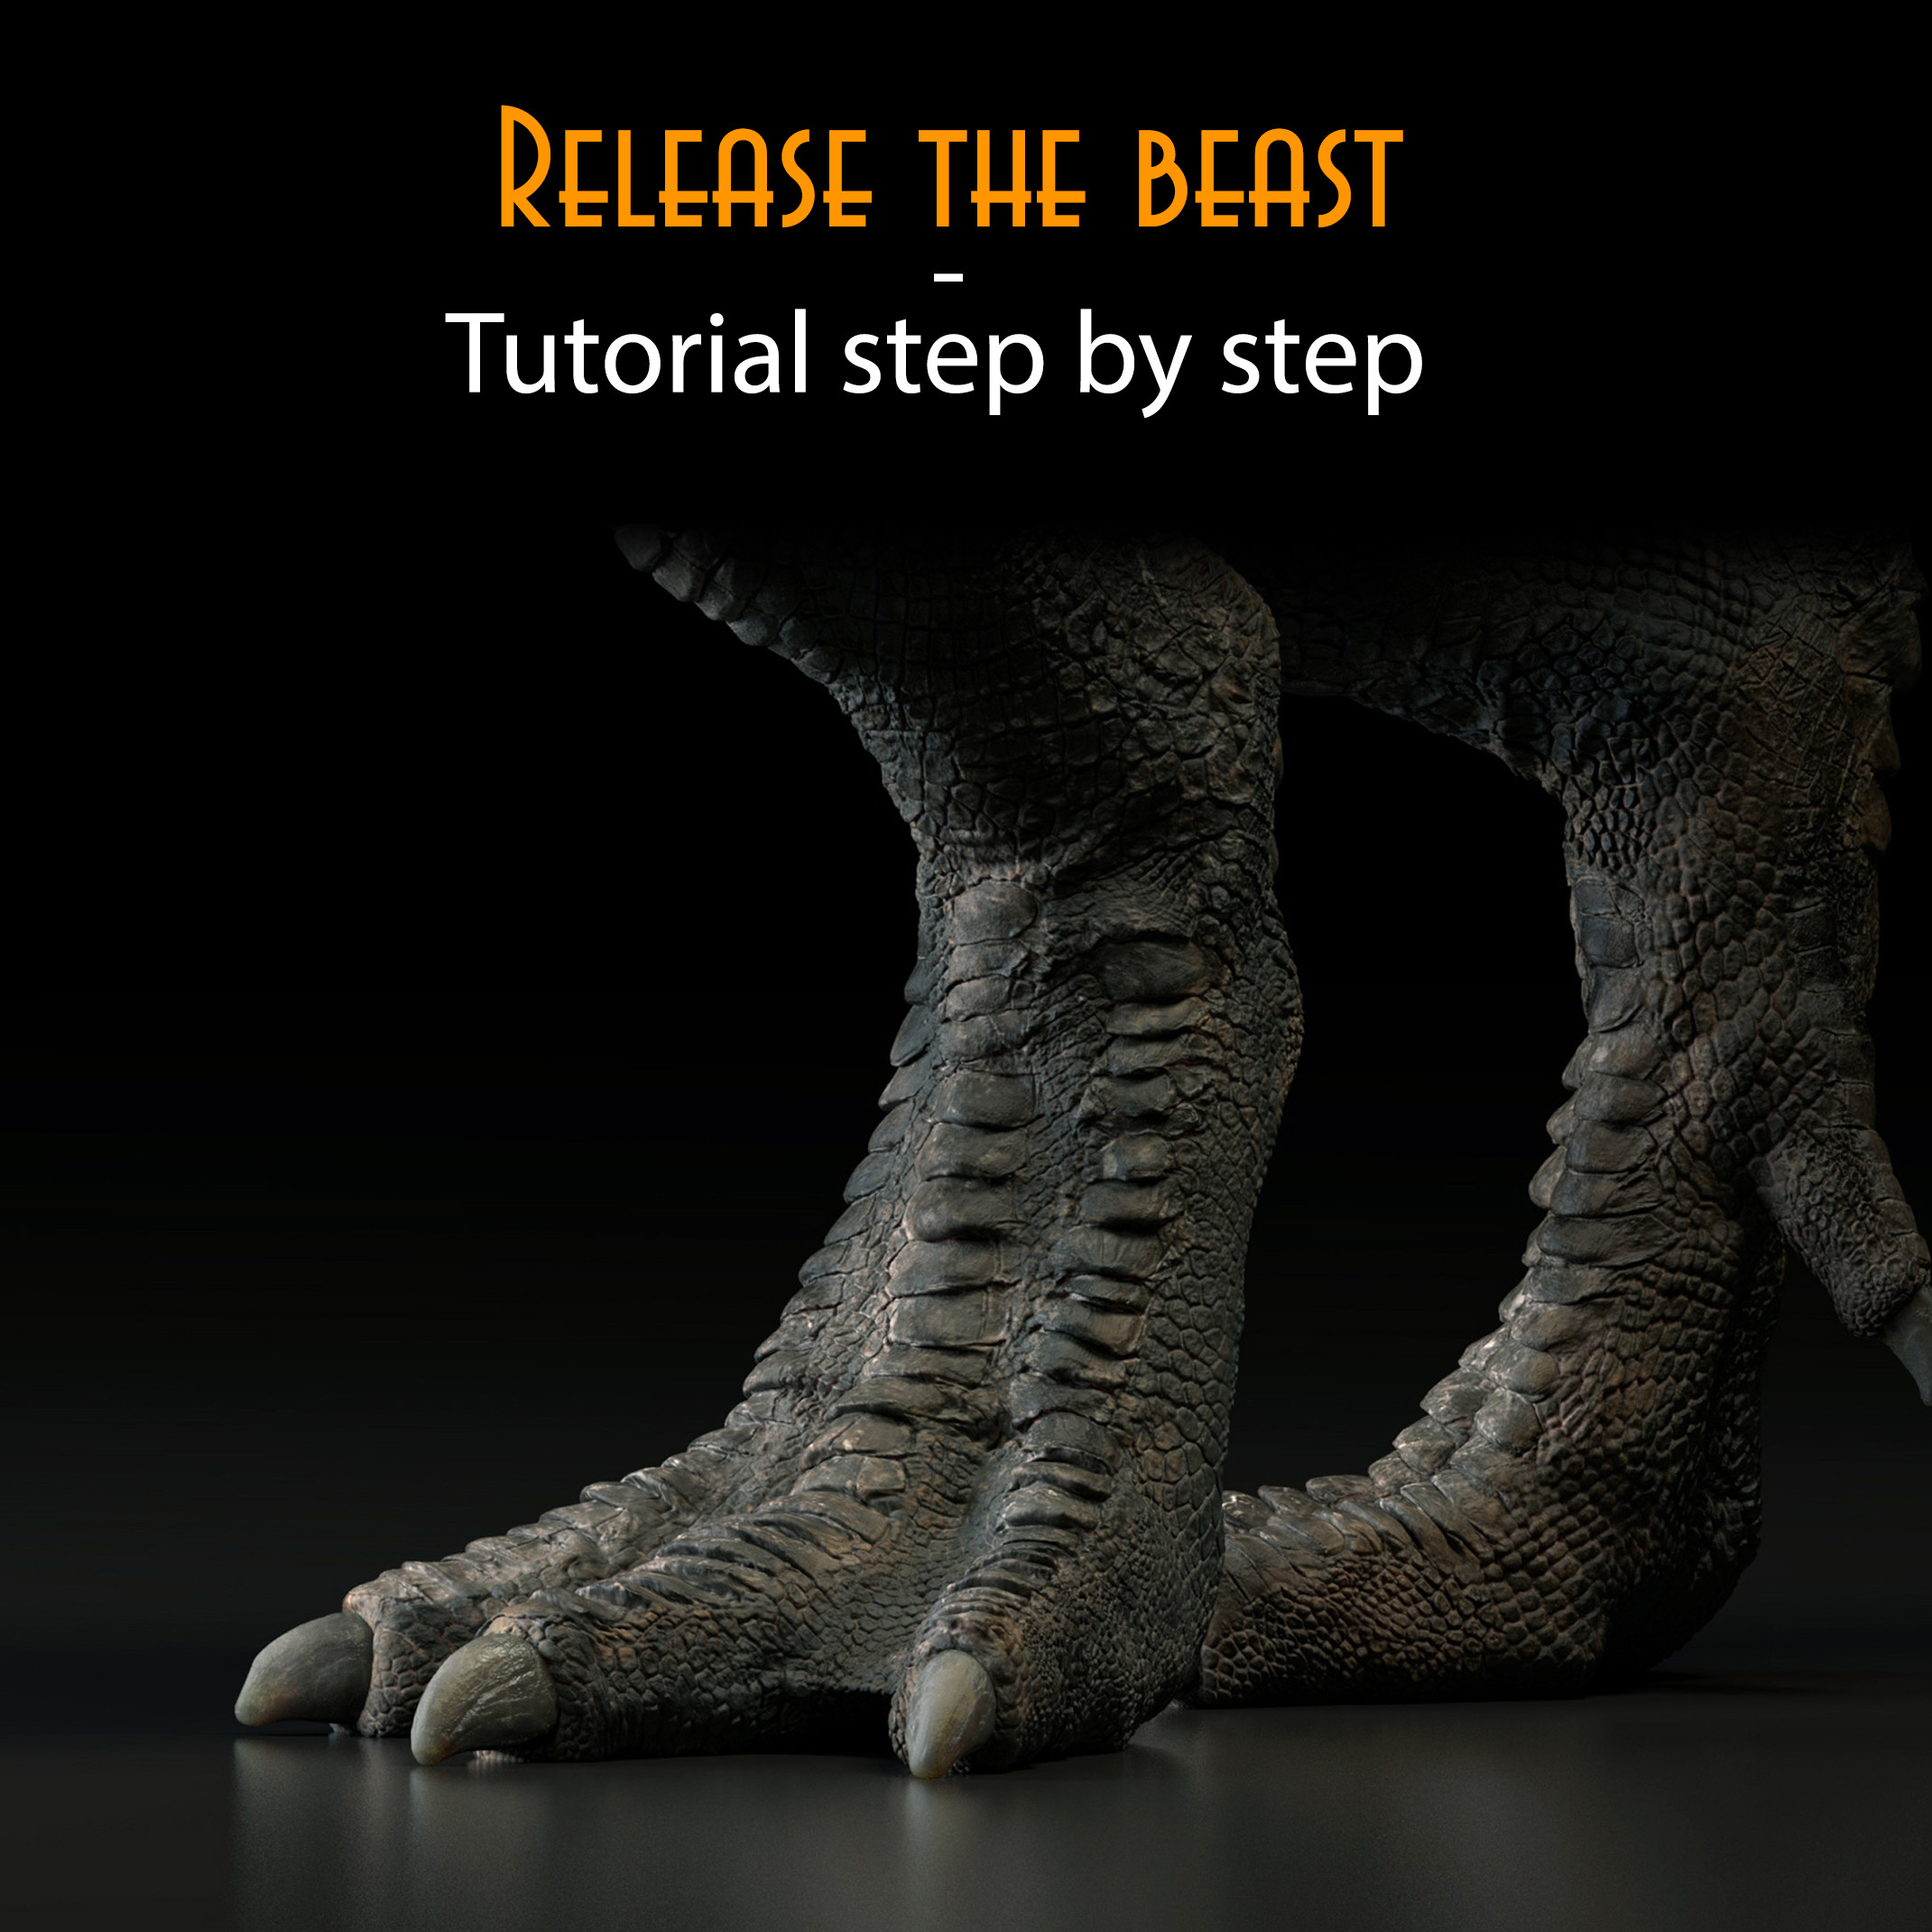 Release the beast - step by step tutorial about how to create high believable creatures for VFX